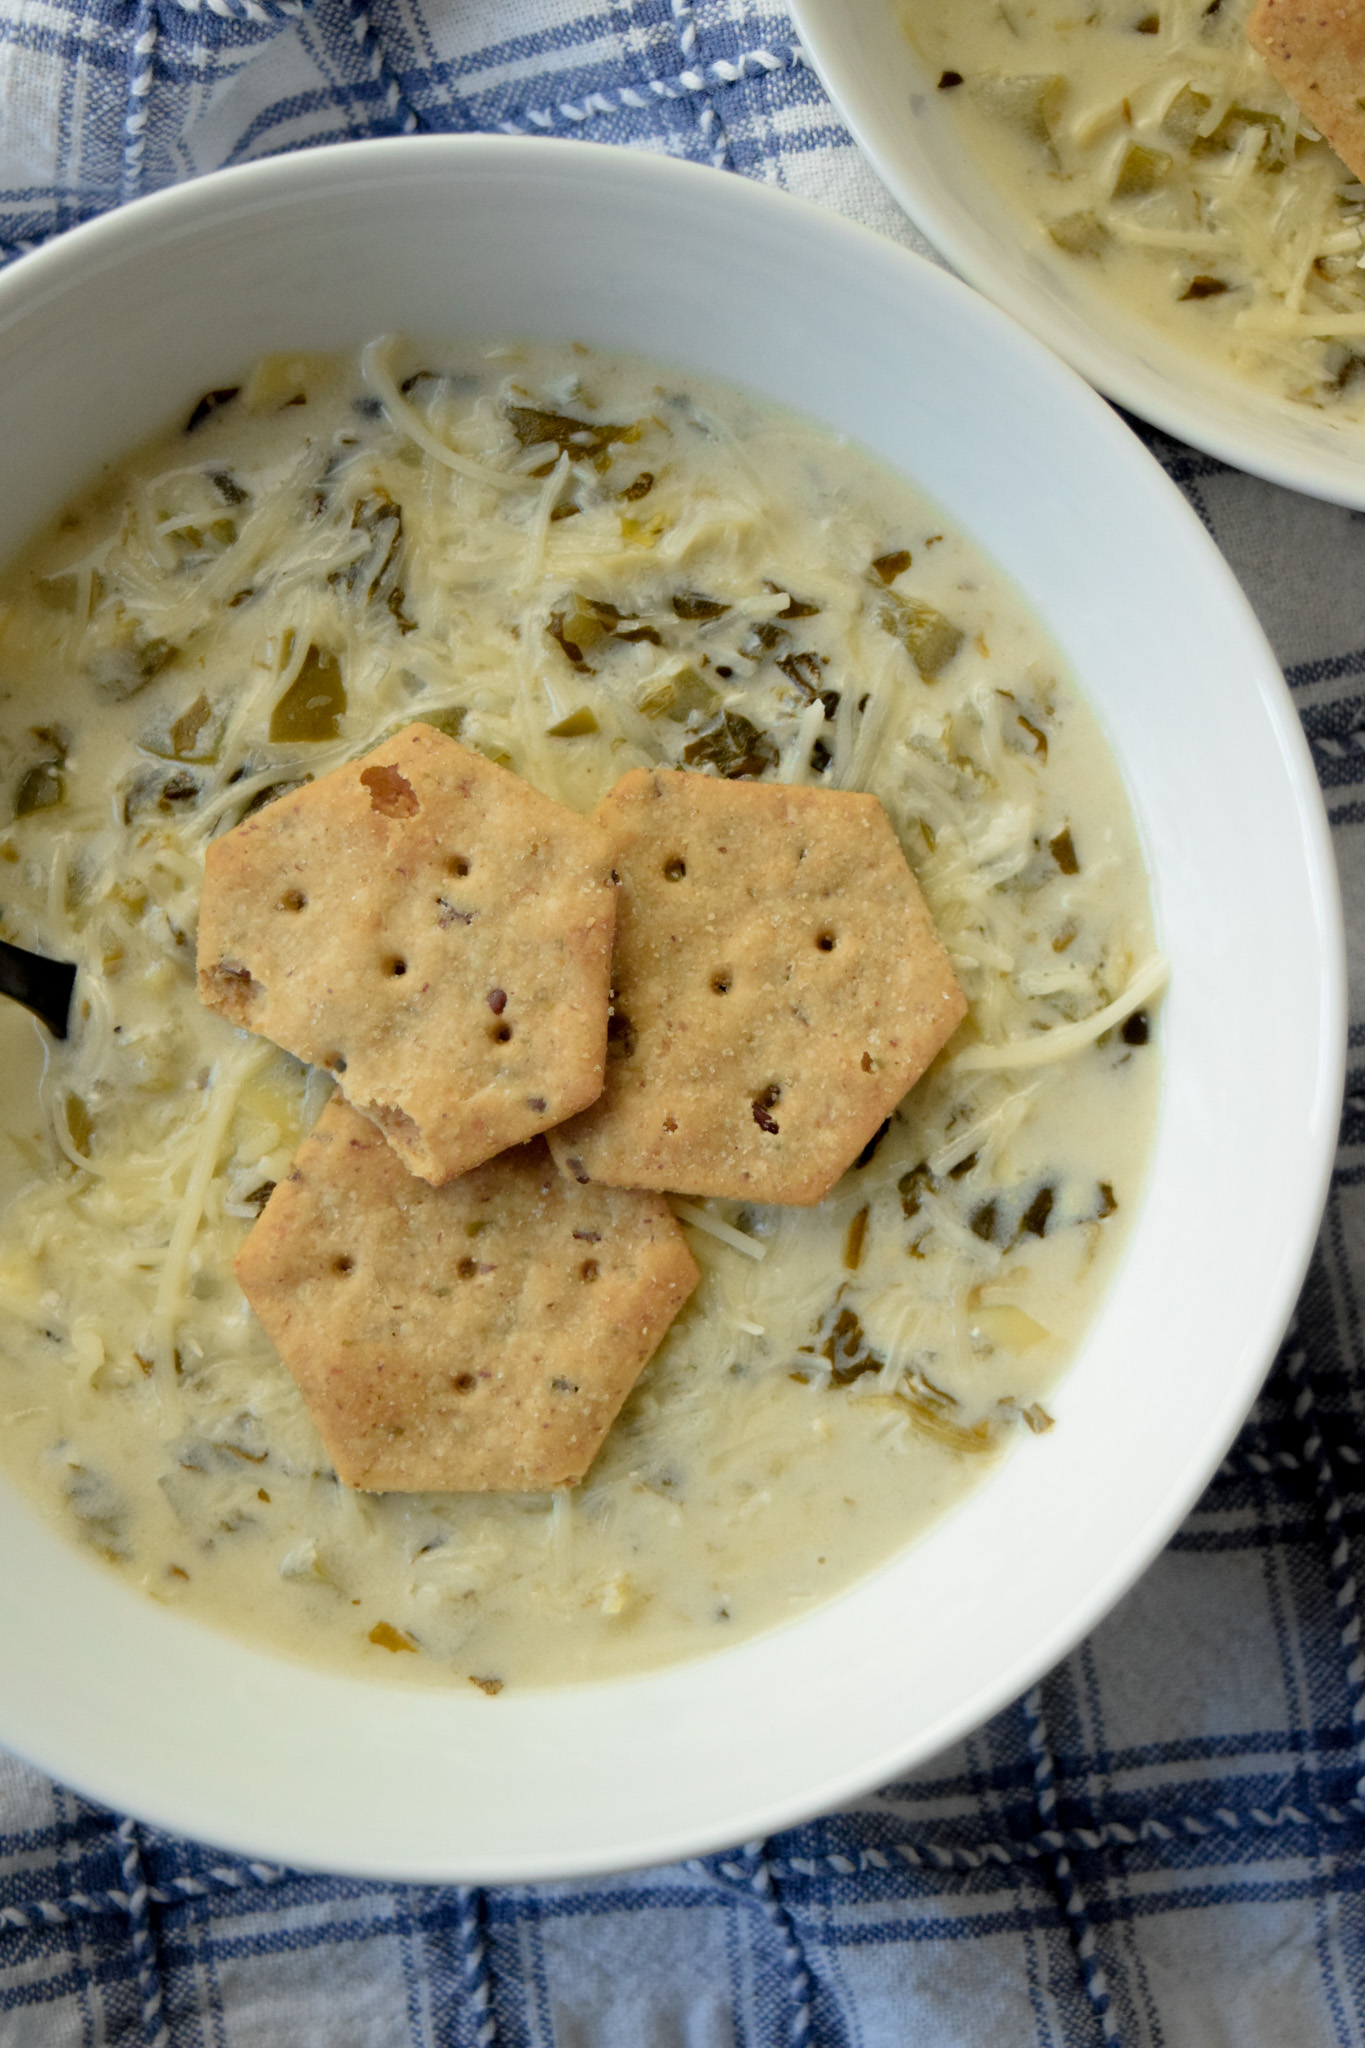 Creamy Spinach and Artichoke Soup with White Cheddar Cheese